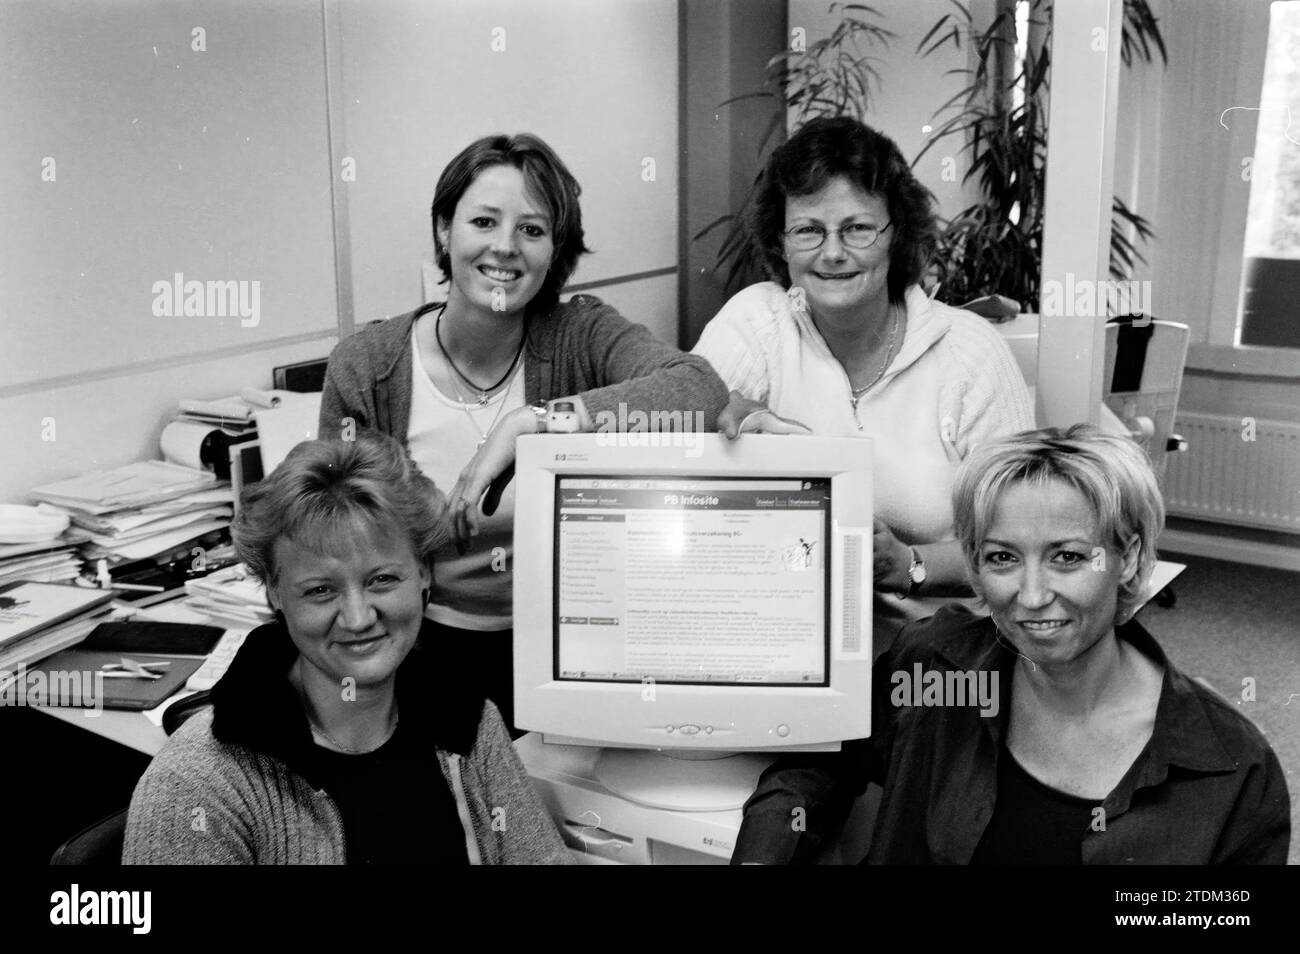 Silver Cross, Maaike van der Horst & team, 05-10-1999, Whizgle News from the Past, Tailored for the Future. Explore historical narratives, Dutch The Netherlands agency image with a modern perspective, bridging the gap between yesterday's events and tomorrow's insights. A timeless journey shaping the stories that shape our future Stock Photo